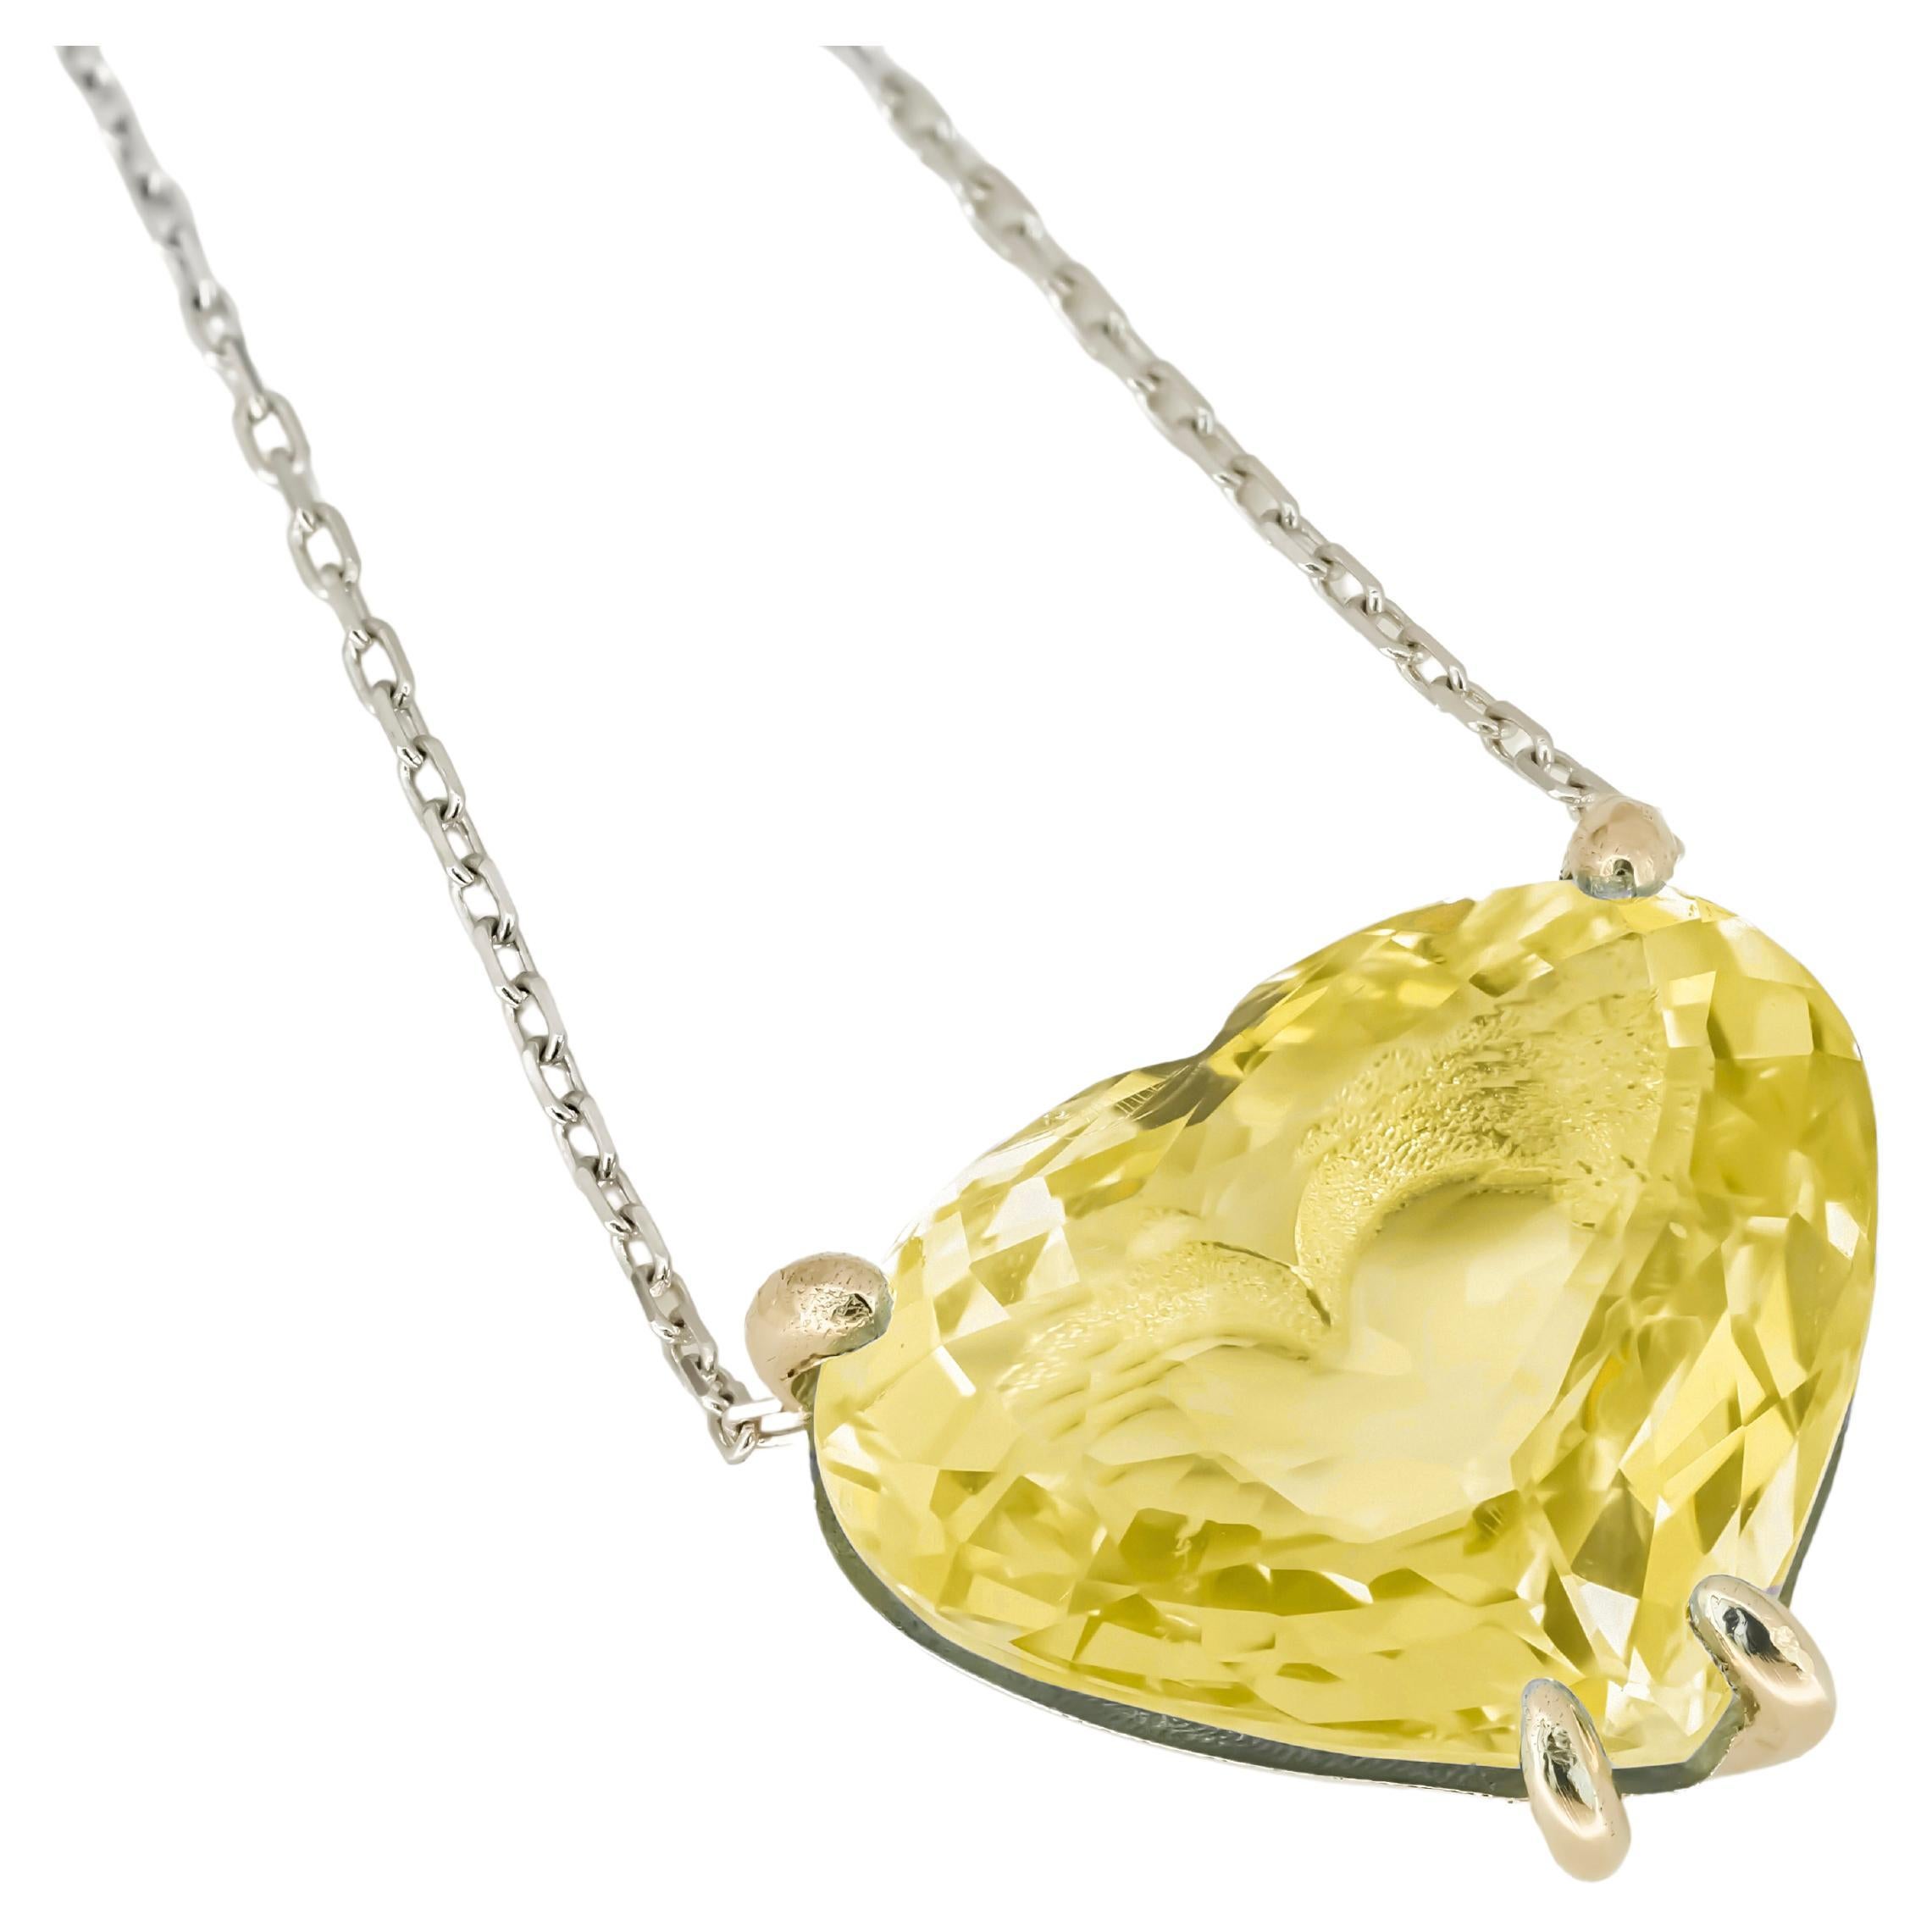 Heart shaped citrine pendant necklace in 14k gold. 